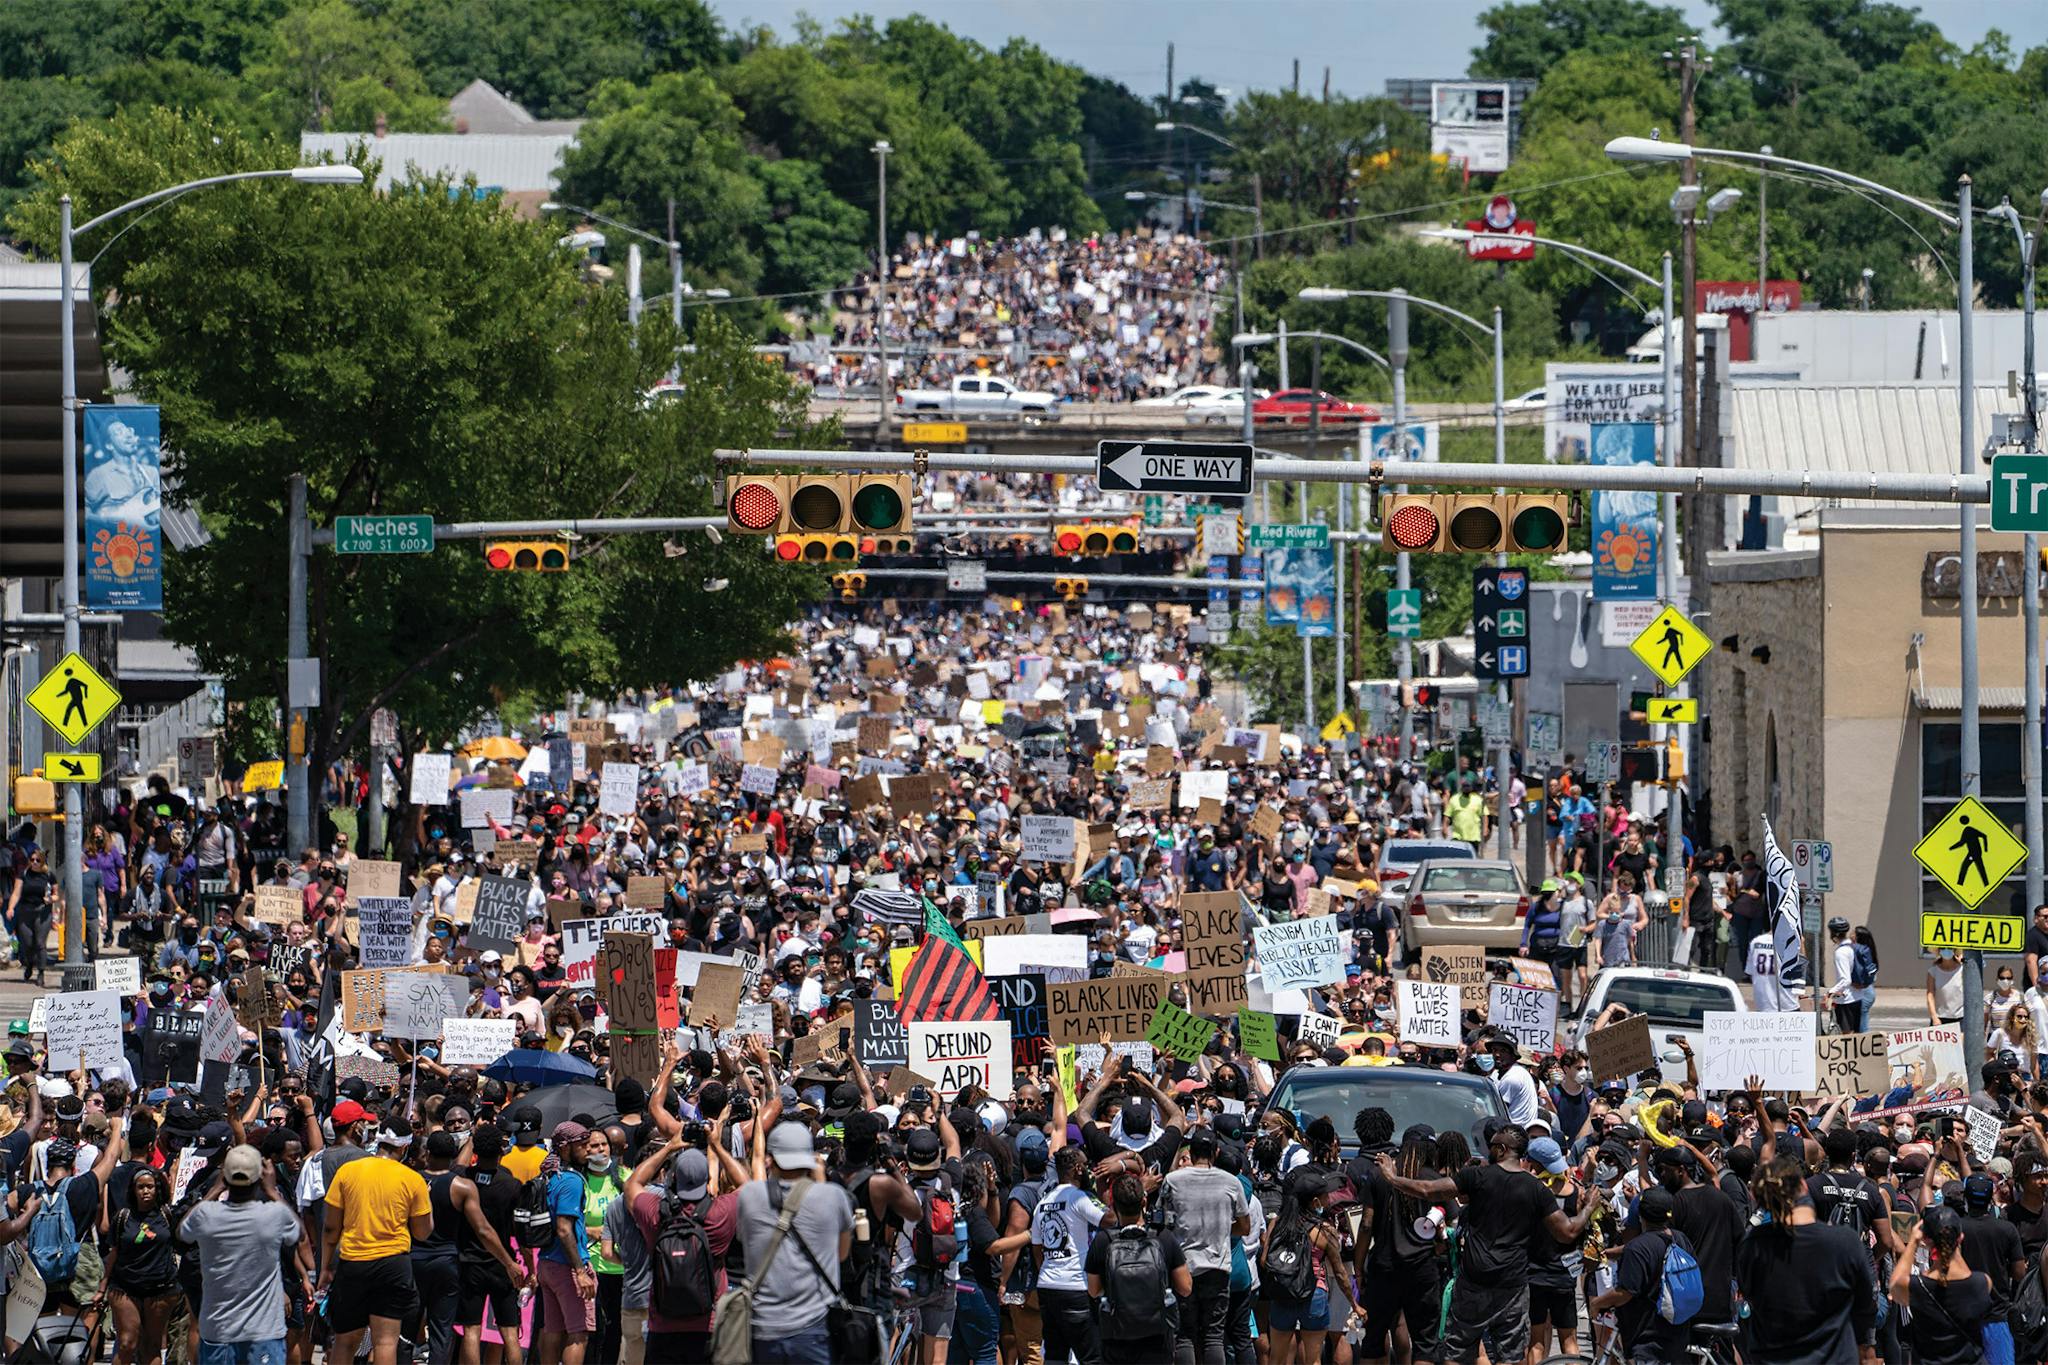 Protesters march west on 7th St through downtown Austin on June 7, 2020. The march began at Huston-Tillotson University as a rally for Black Lives, organized by the Austin Justice Coalition. An estimated 6,000 people participated in the march, despite the ongoing coronavirus pandemic.